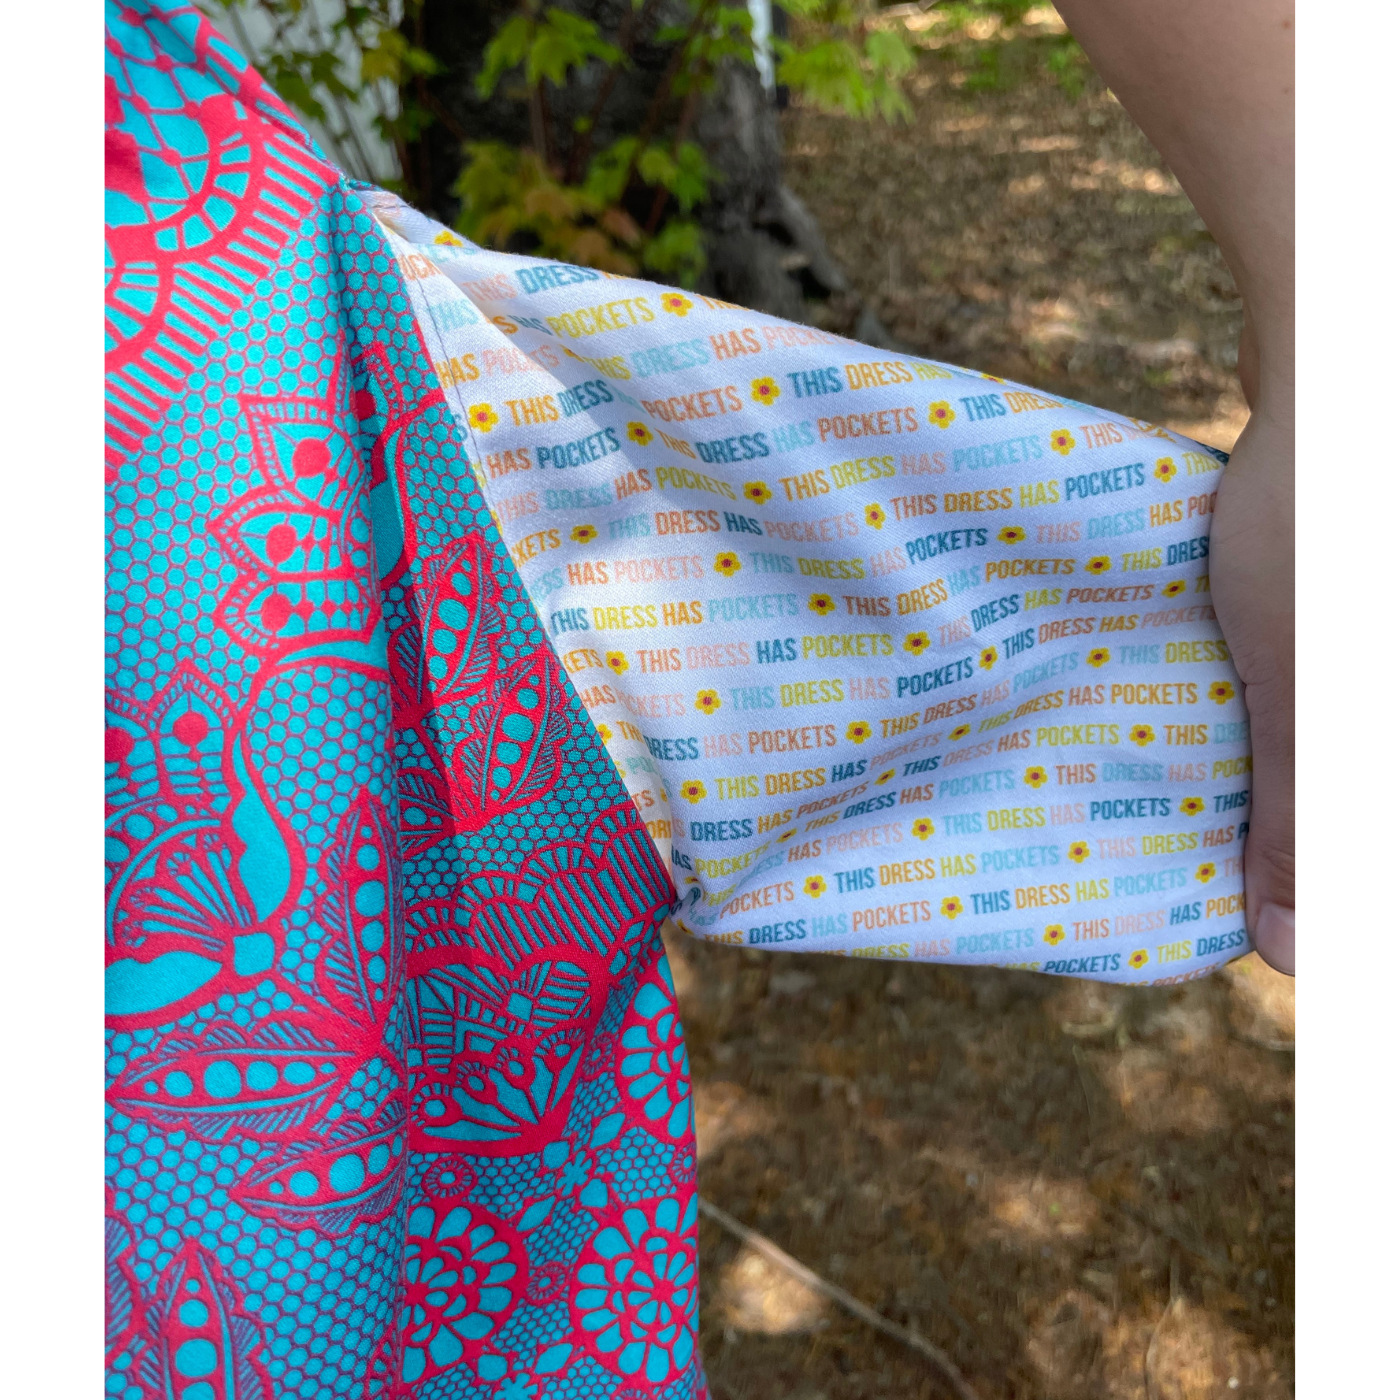 A close up of where a long turquoise dress with a hot pink lace design meets the pocket fabric. The pocket fabric design has a white background and small repeating text that says “This dress has pockets!” in turquoise, orange, yellow and blue with small yellow sunflowers between each repeating sentence.